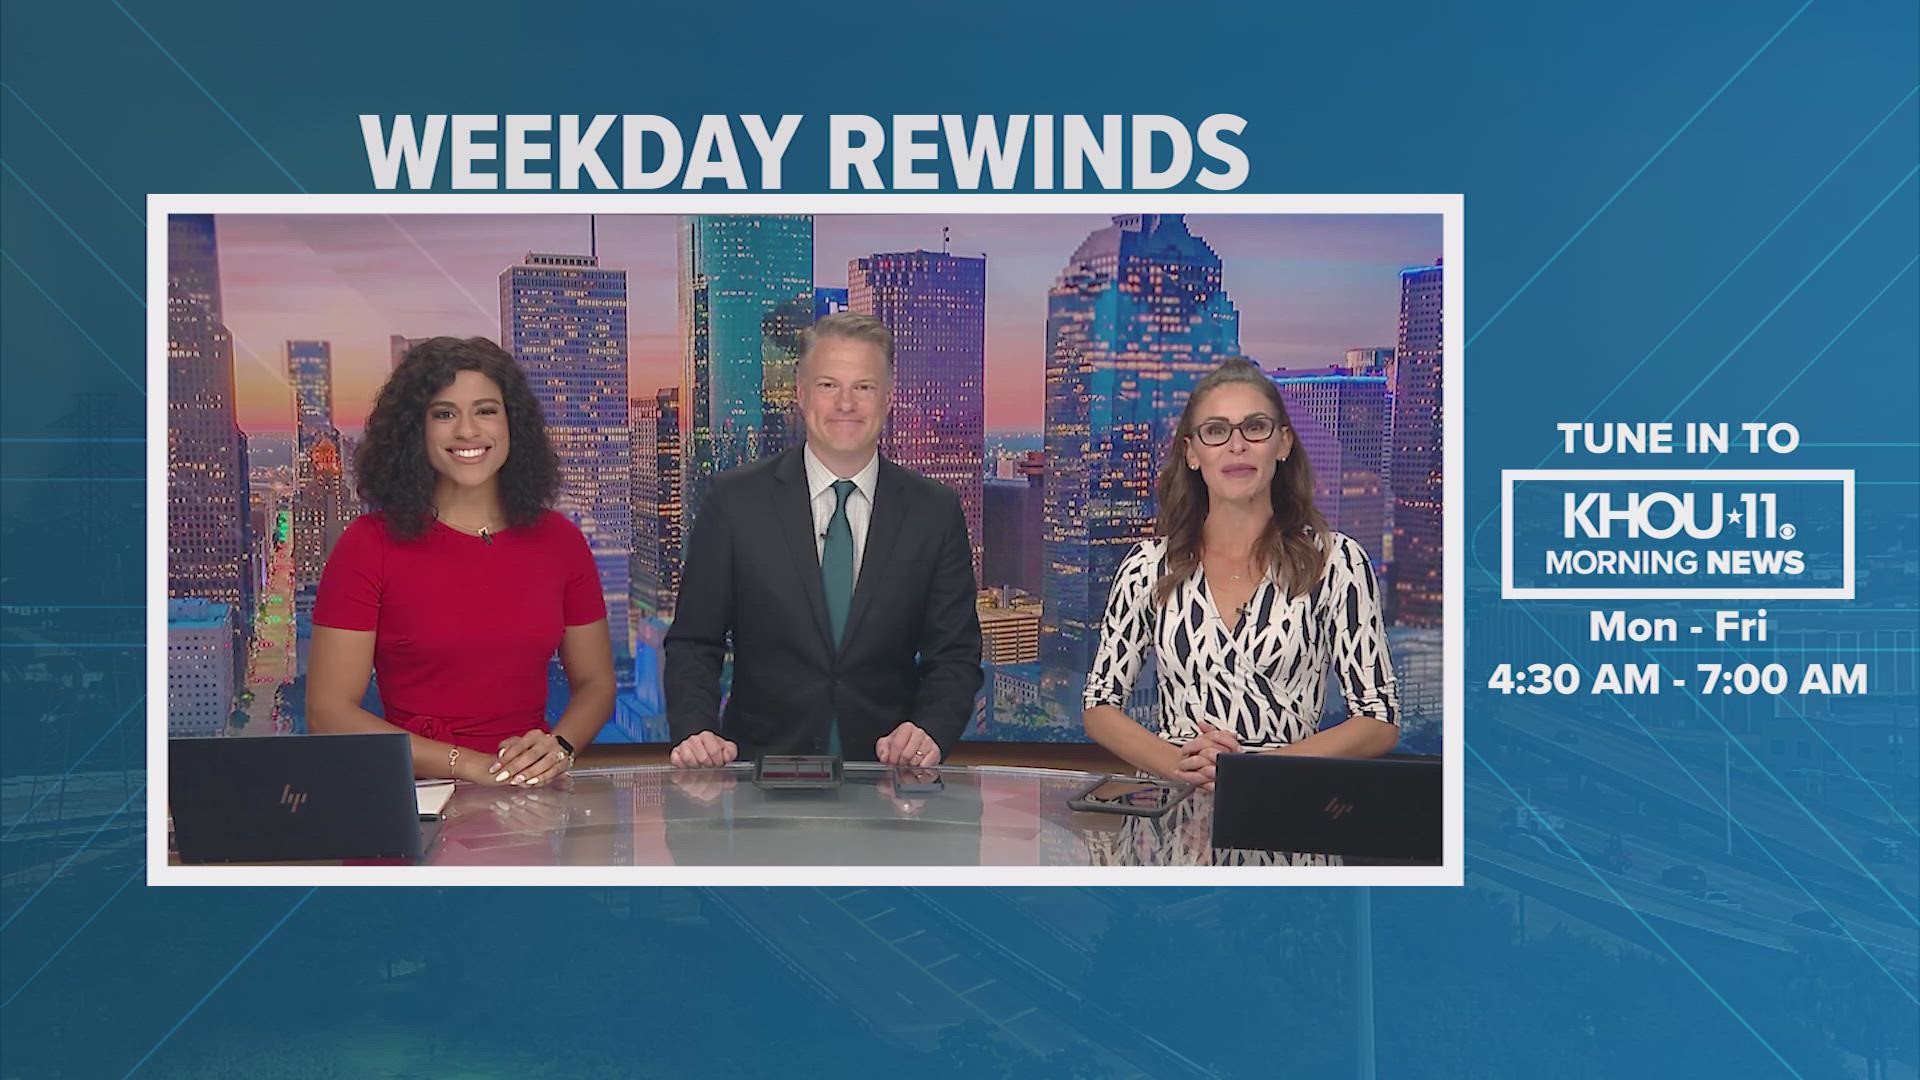 A look back at the laughs and bloopers this week from the KHOU 11 Morning News Team.